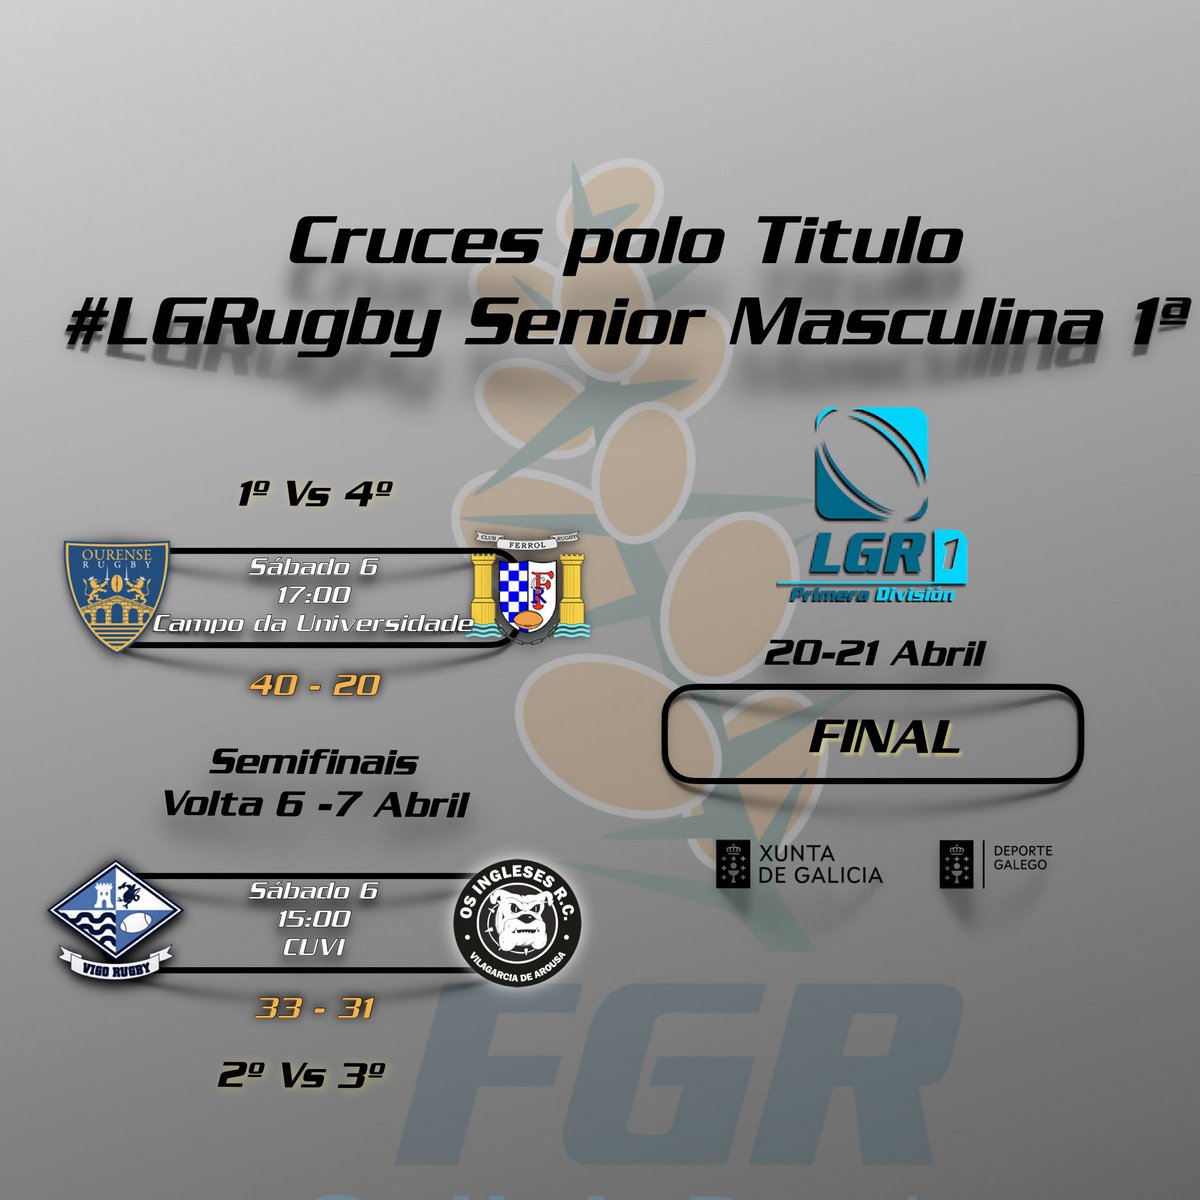 RugbyGalicia tweet picture